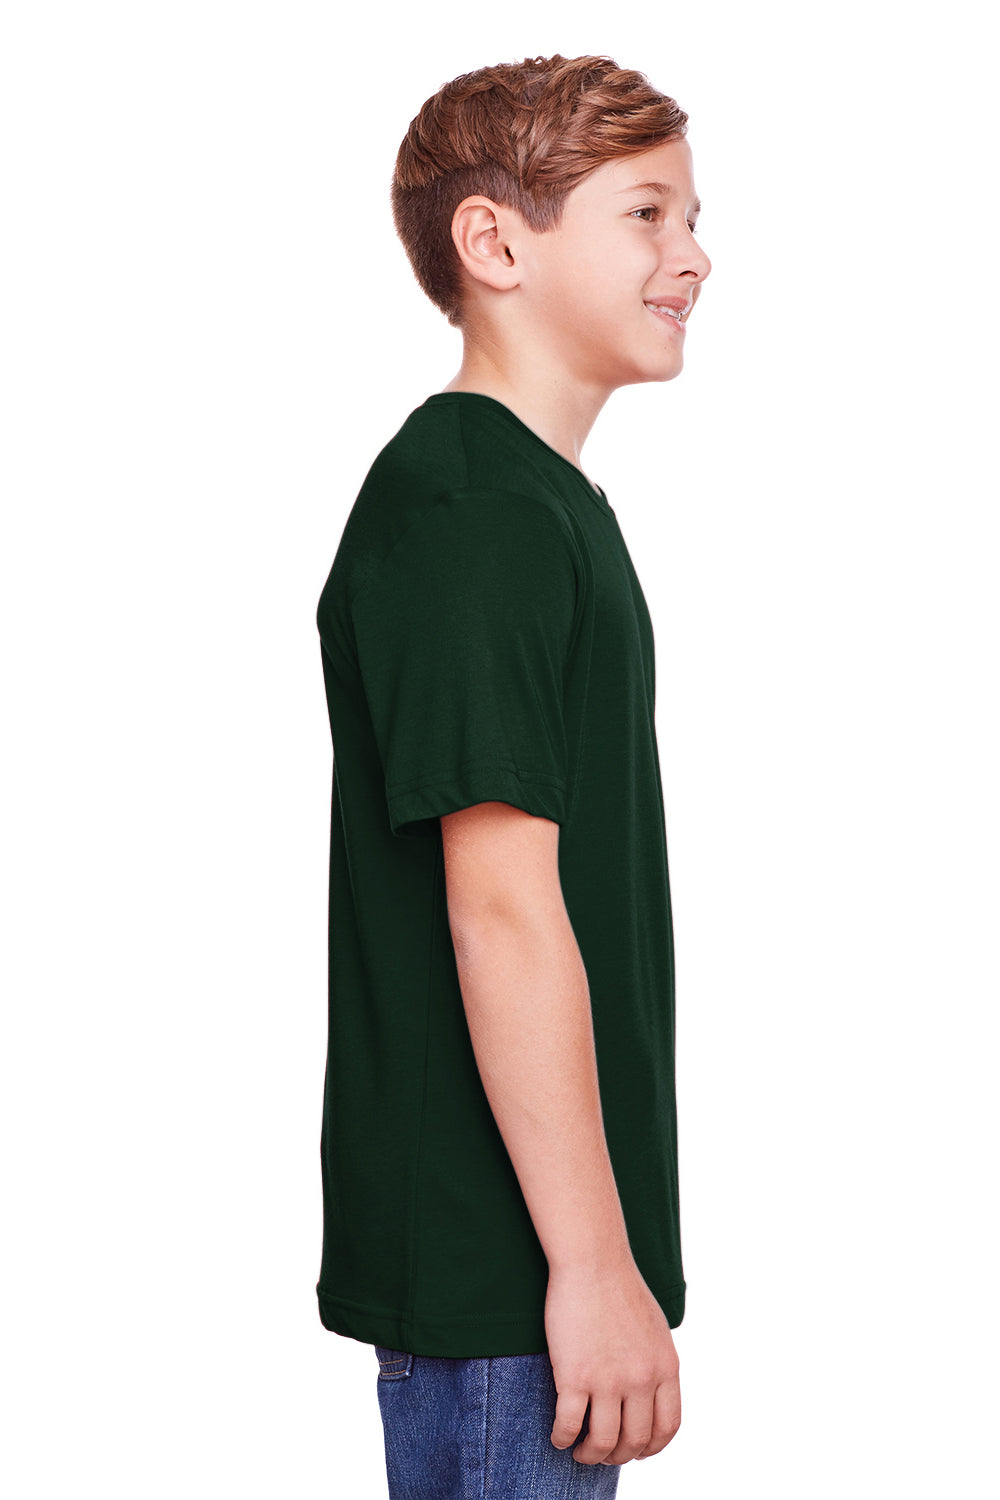 Core 365 CE111Y Youth Fusion ChromaSoft Performance Moisture Wicking Short Sleeve Crewneck T-Shirt Forest Green Side